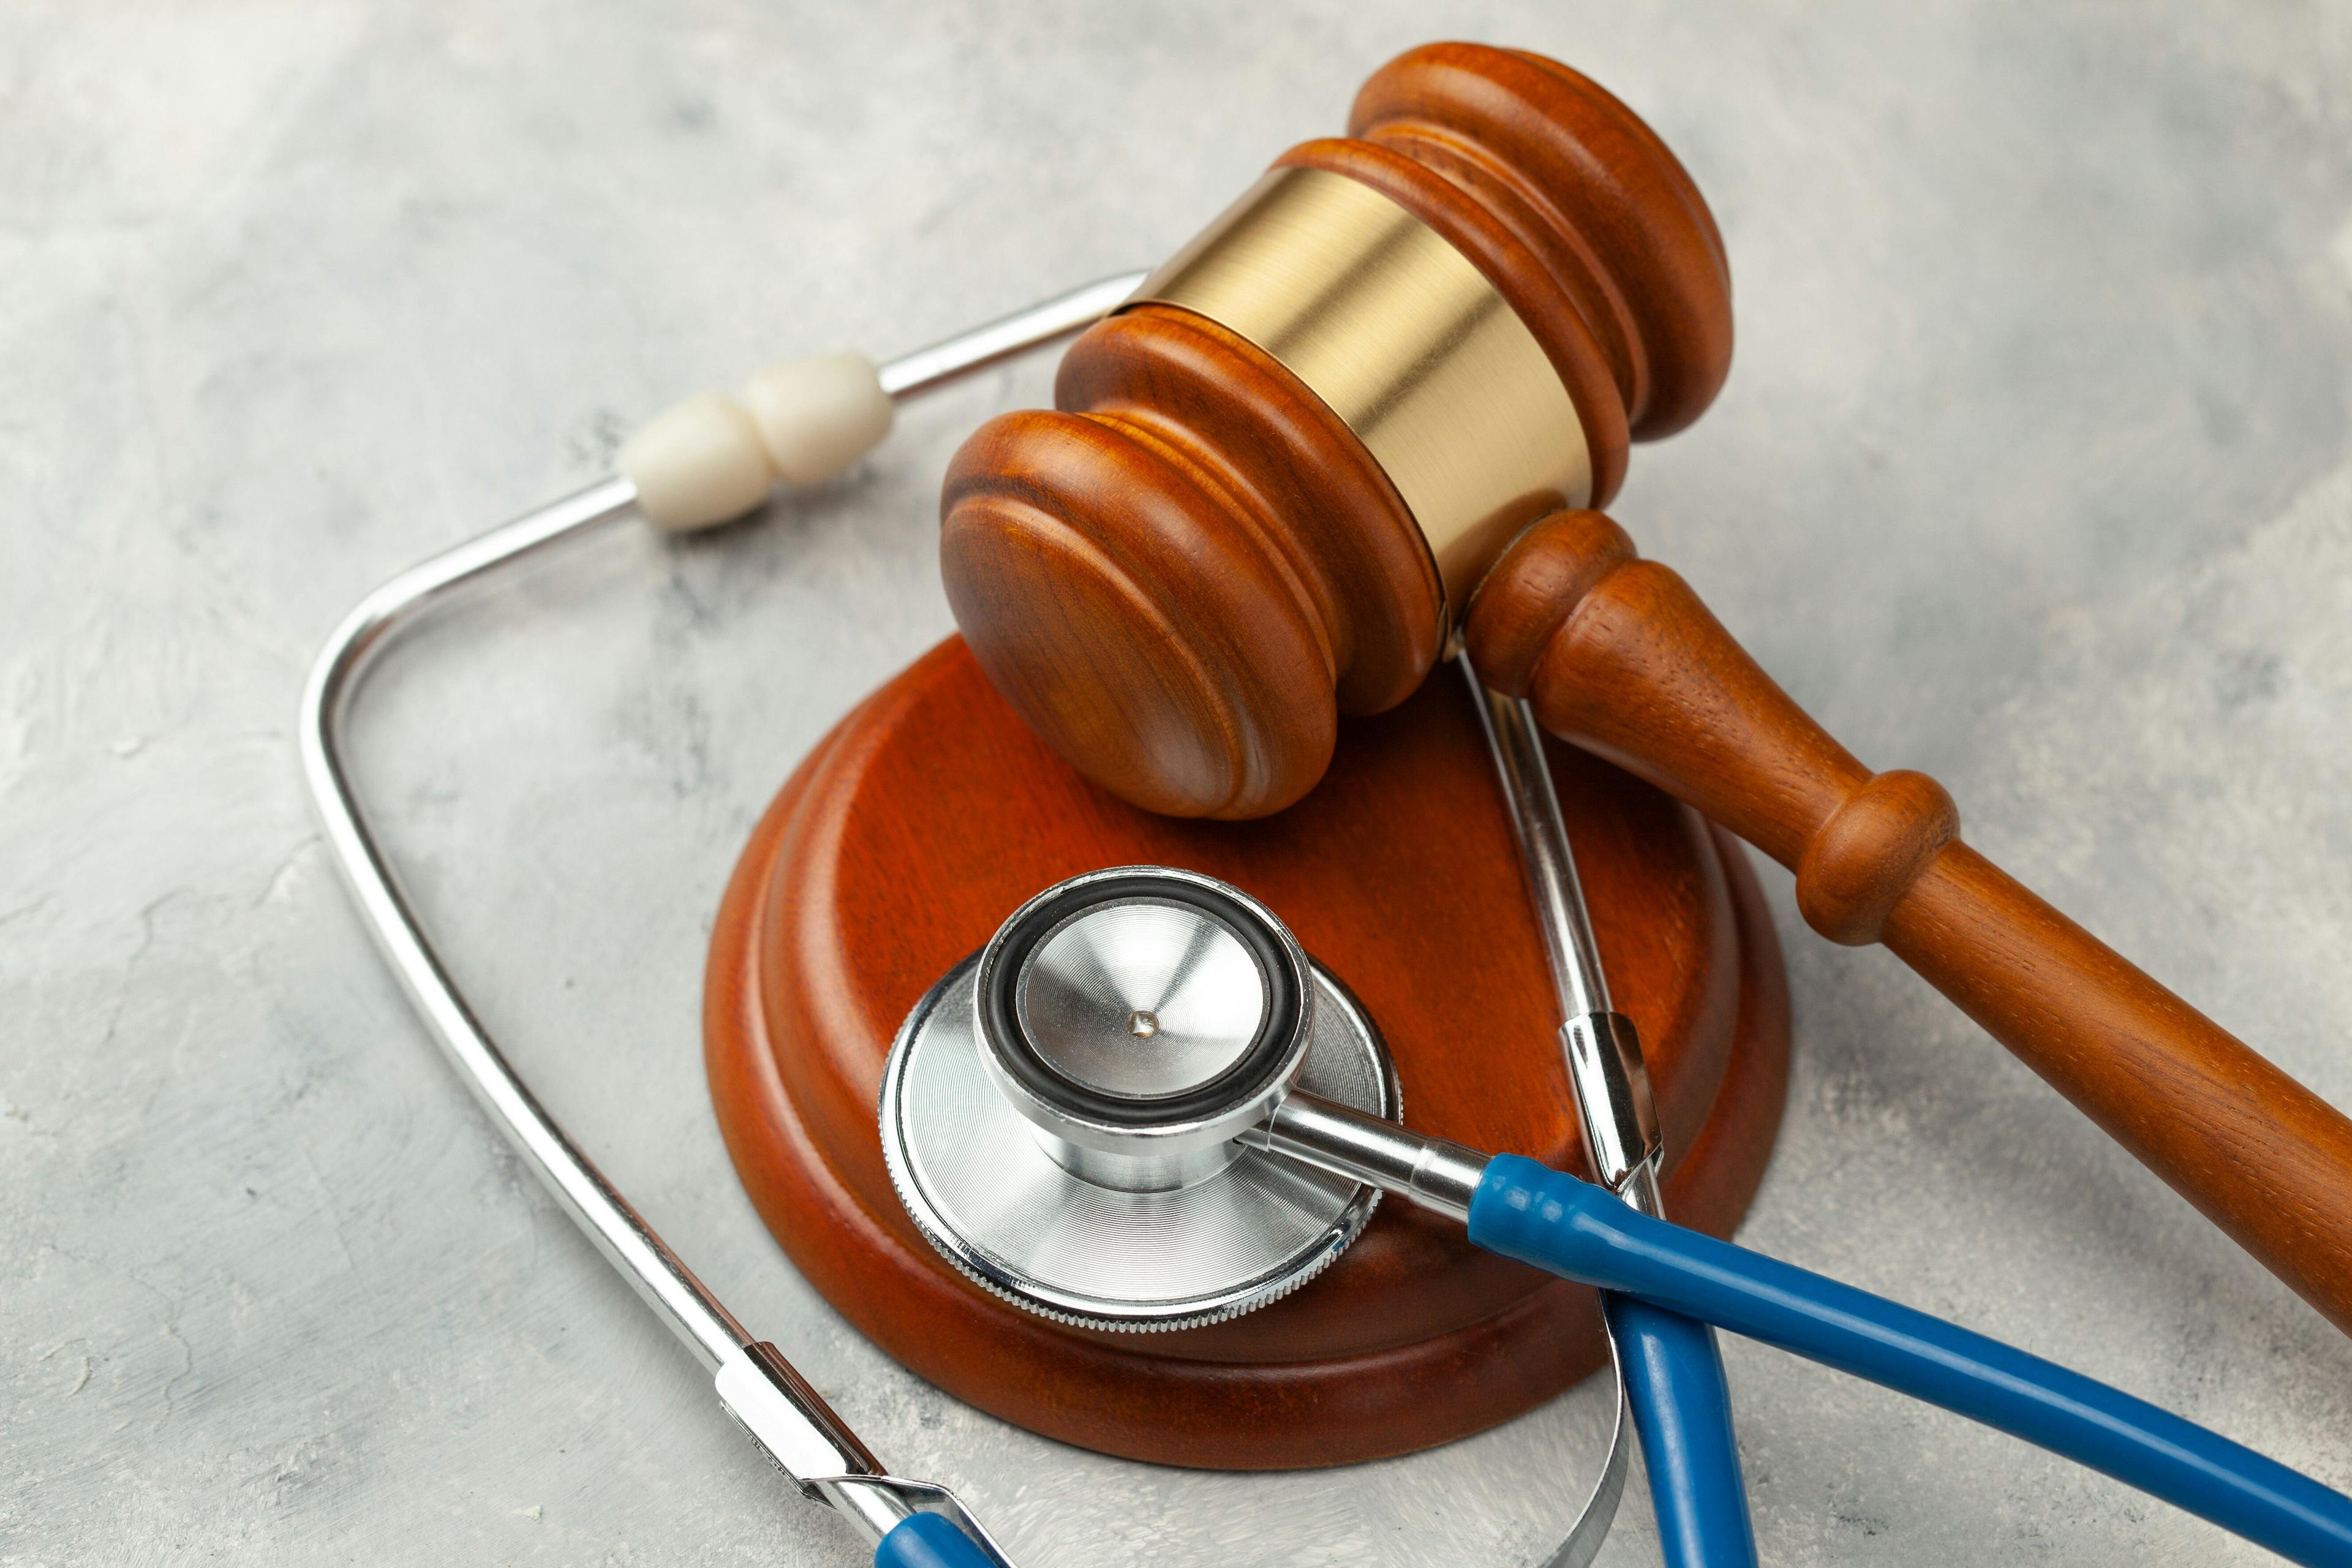 Texas Medical Association sues over surprise billing law arbitration provision